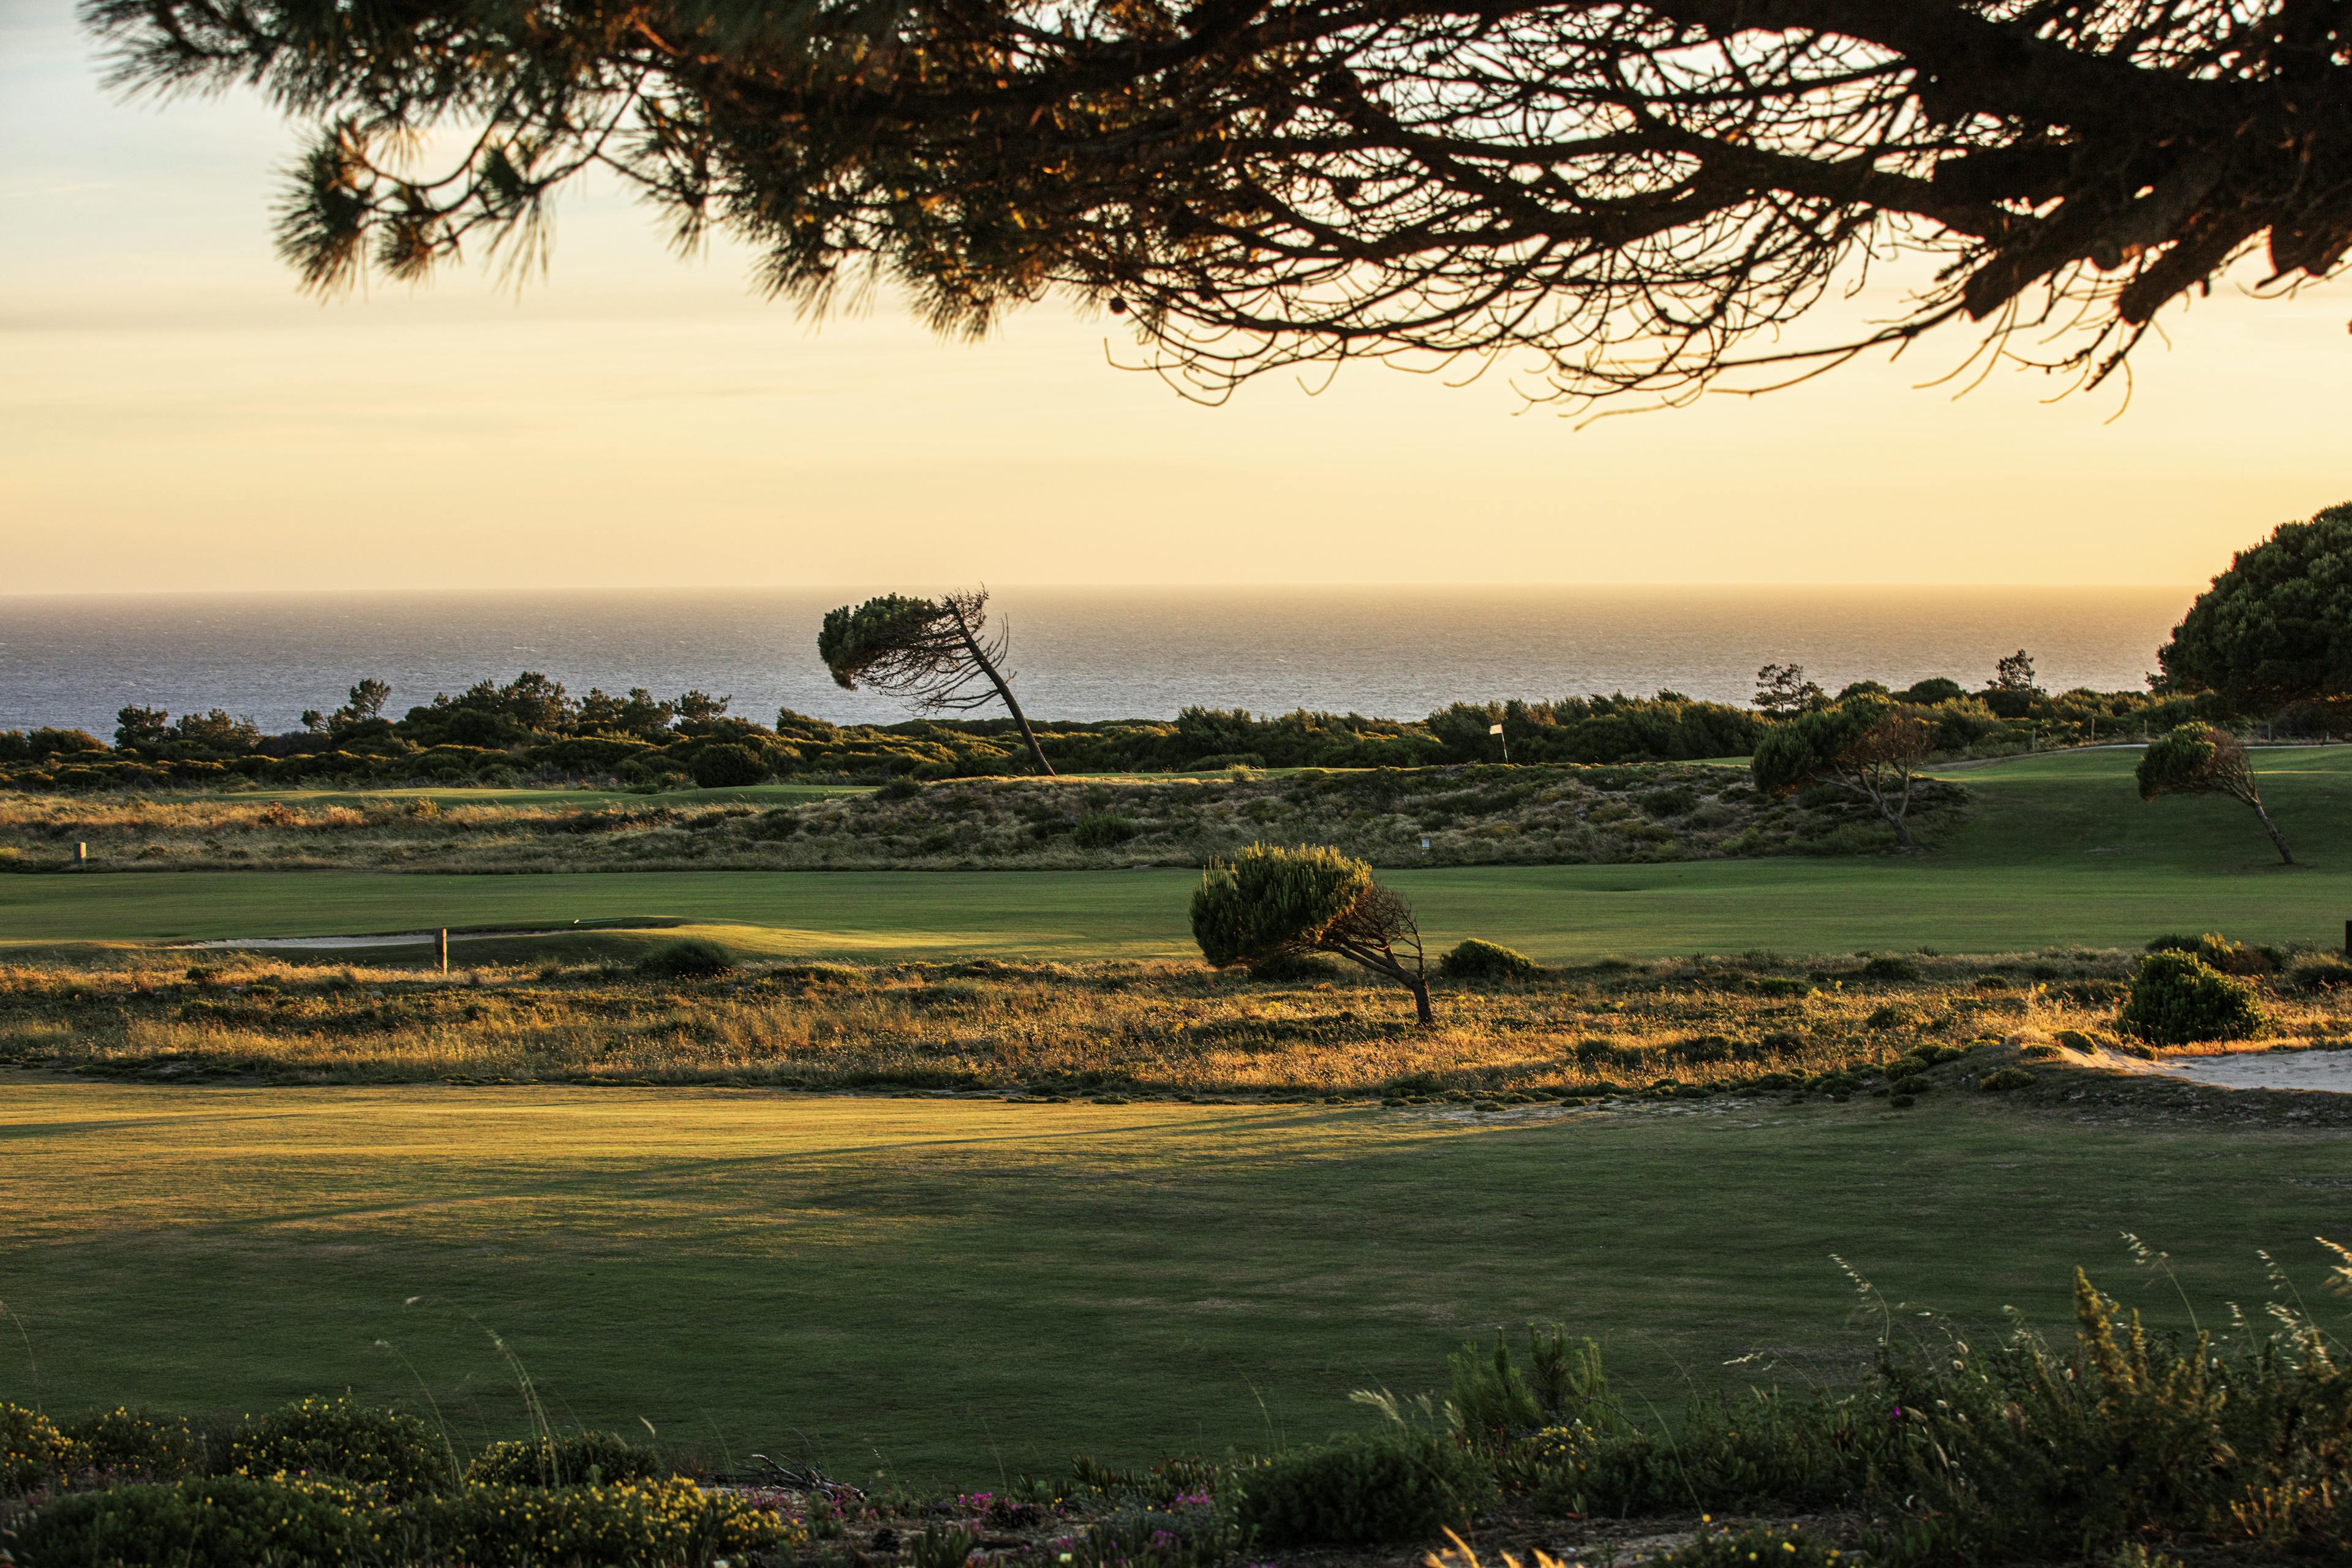 Photo of a golf course in the sunset in Portugal